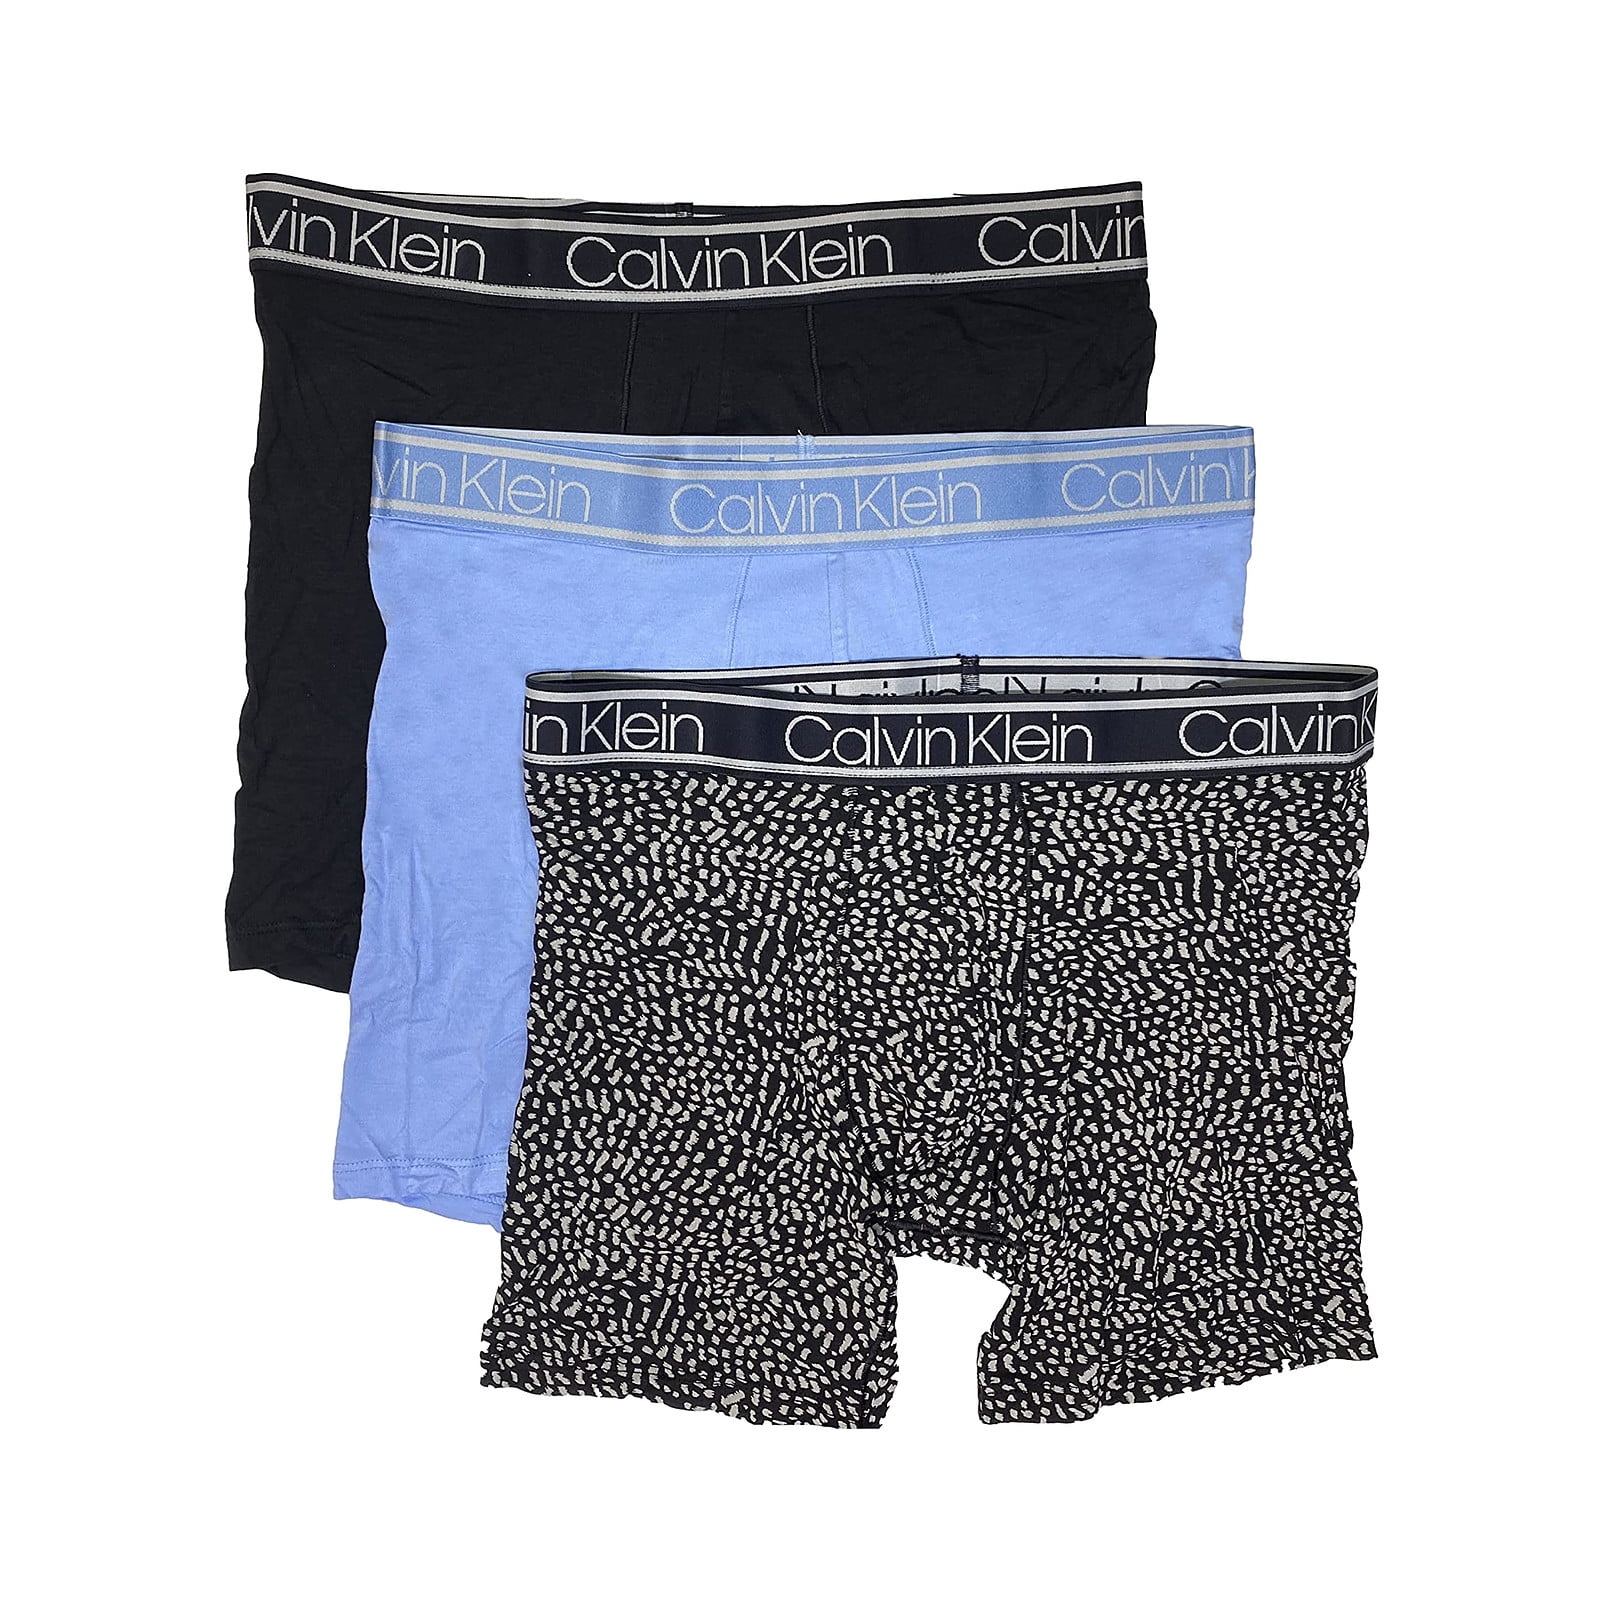 Calvin Klein Mens 3-Pack The Ultimate Comfort Bamboo Boxer Briefs (Large) -  